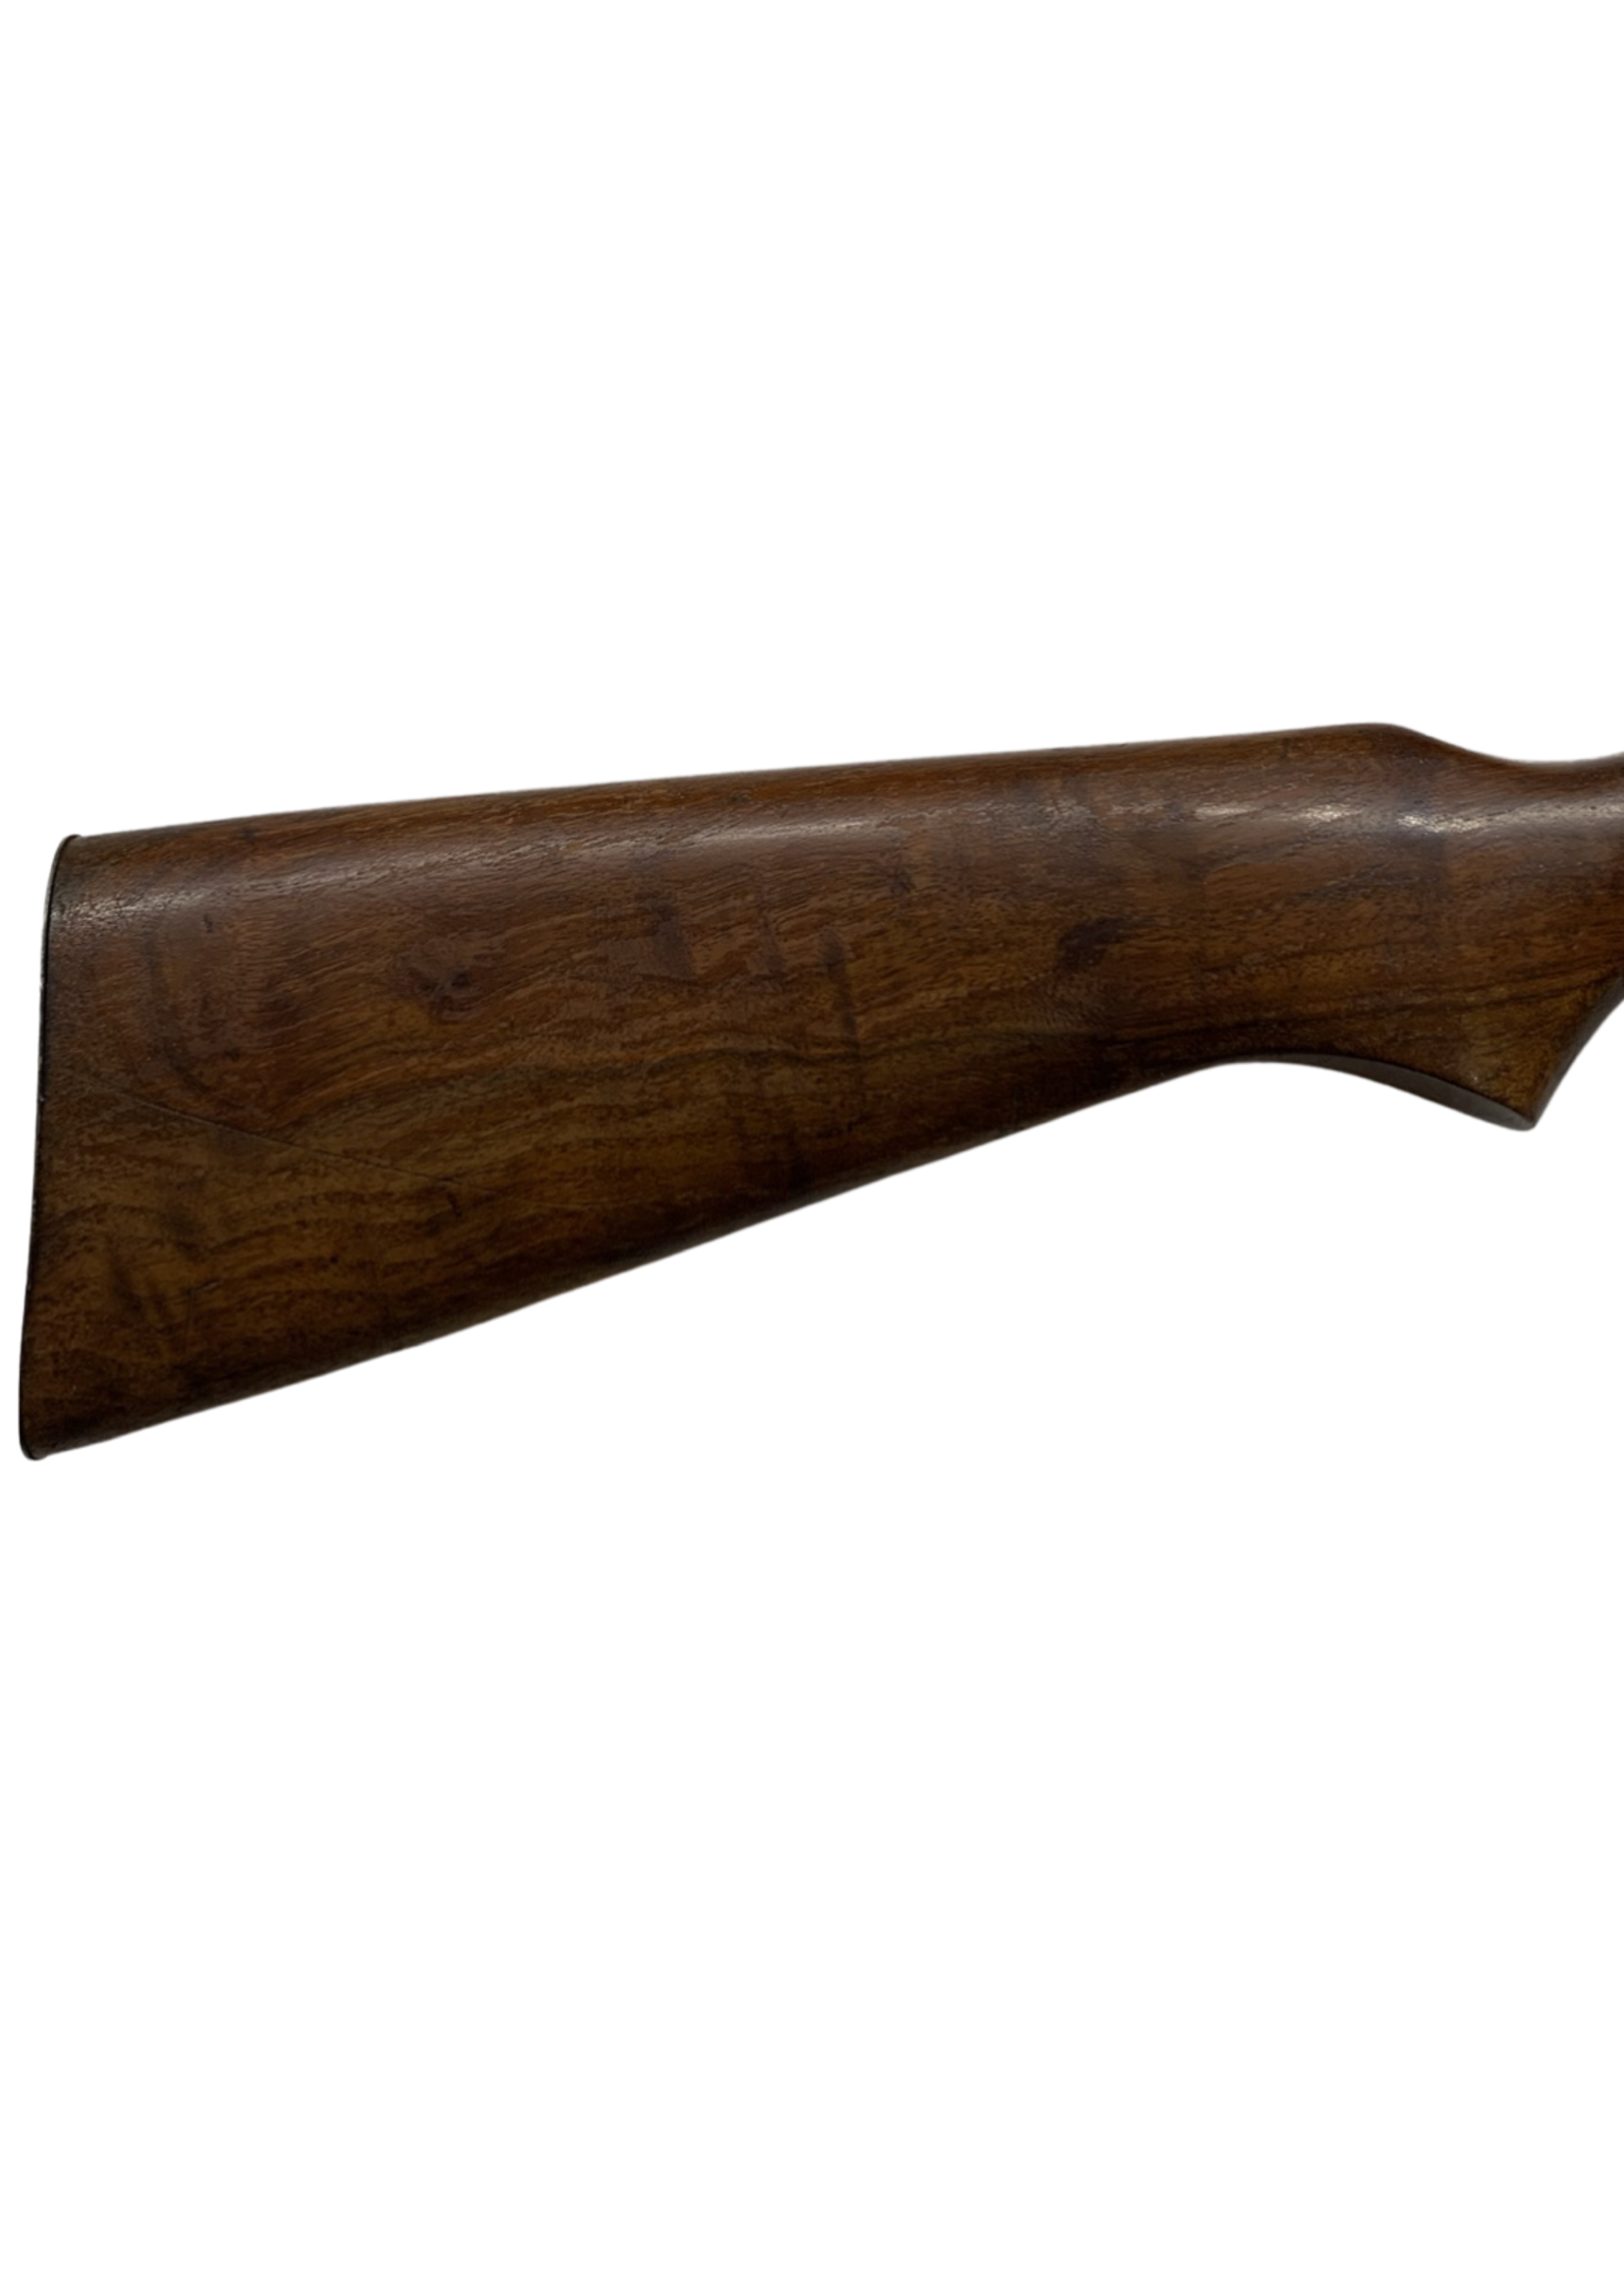 USED COOEY WINCHESTER 22 LR 39 WOOD STOCK